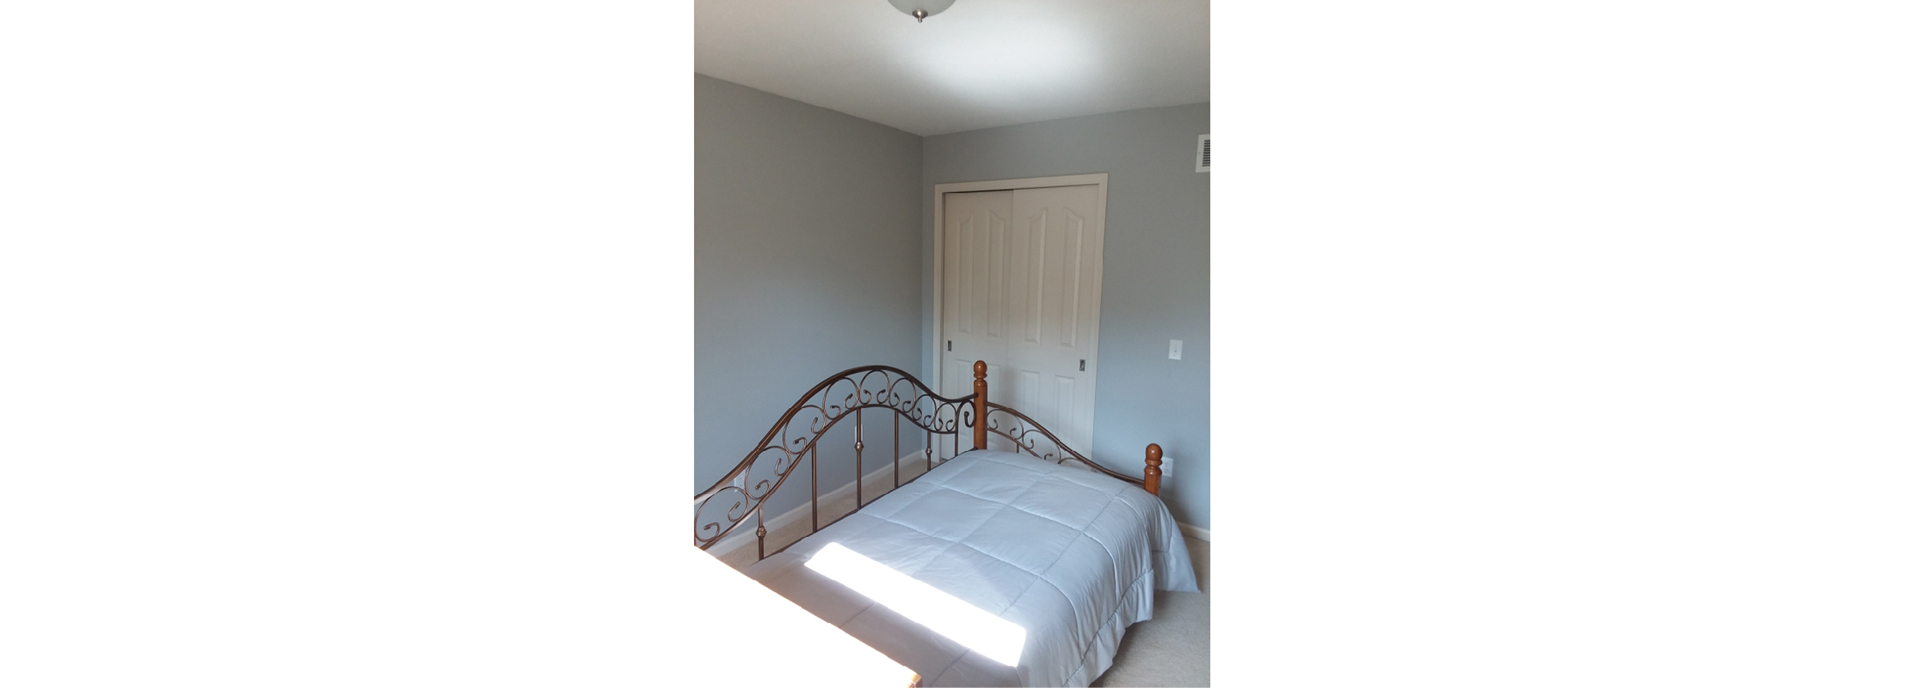 bedroom walls painting before and after - after - broadview heights ohio